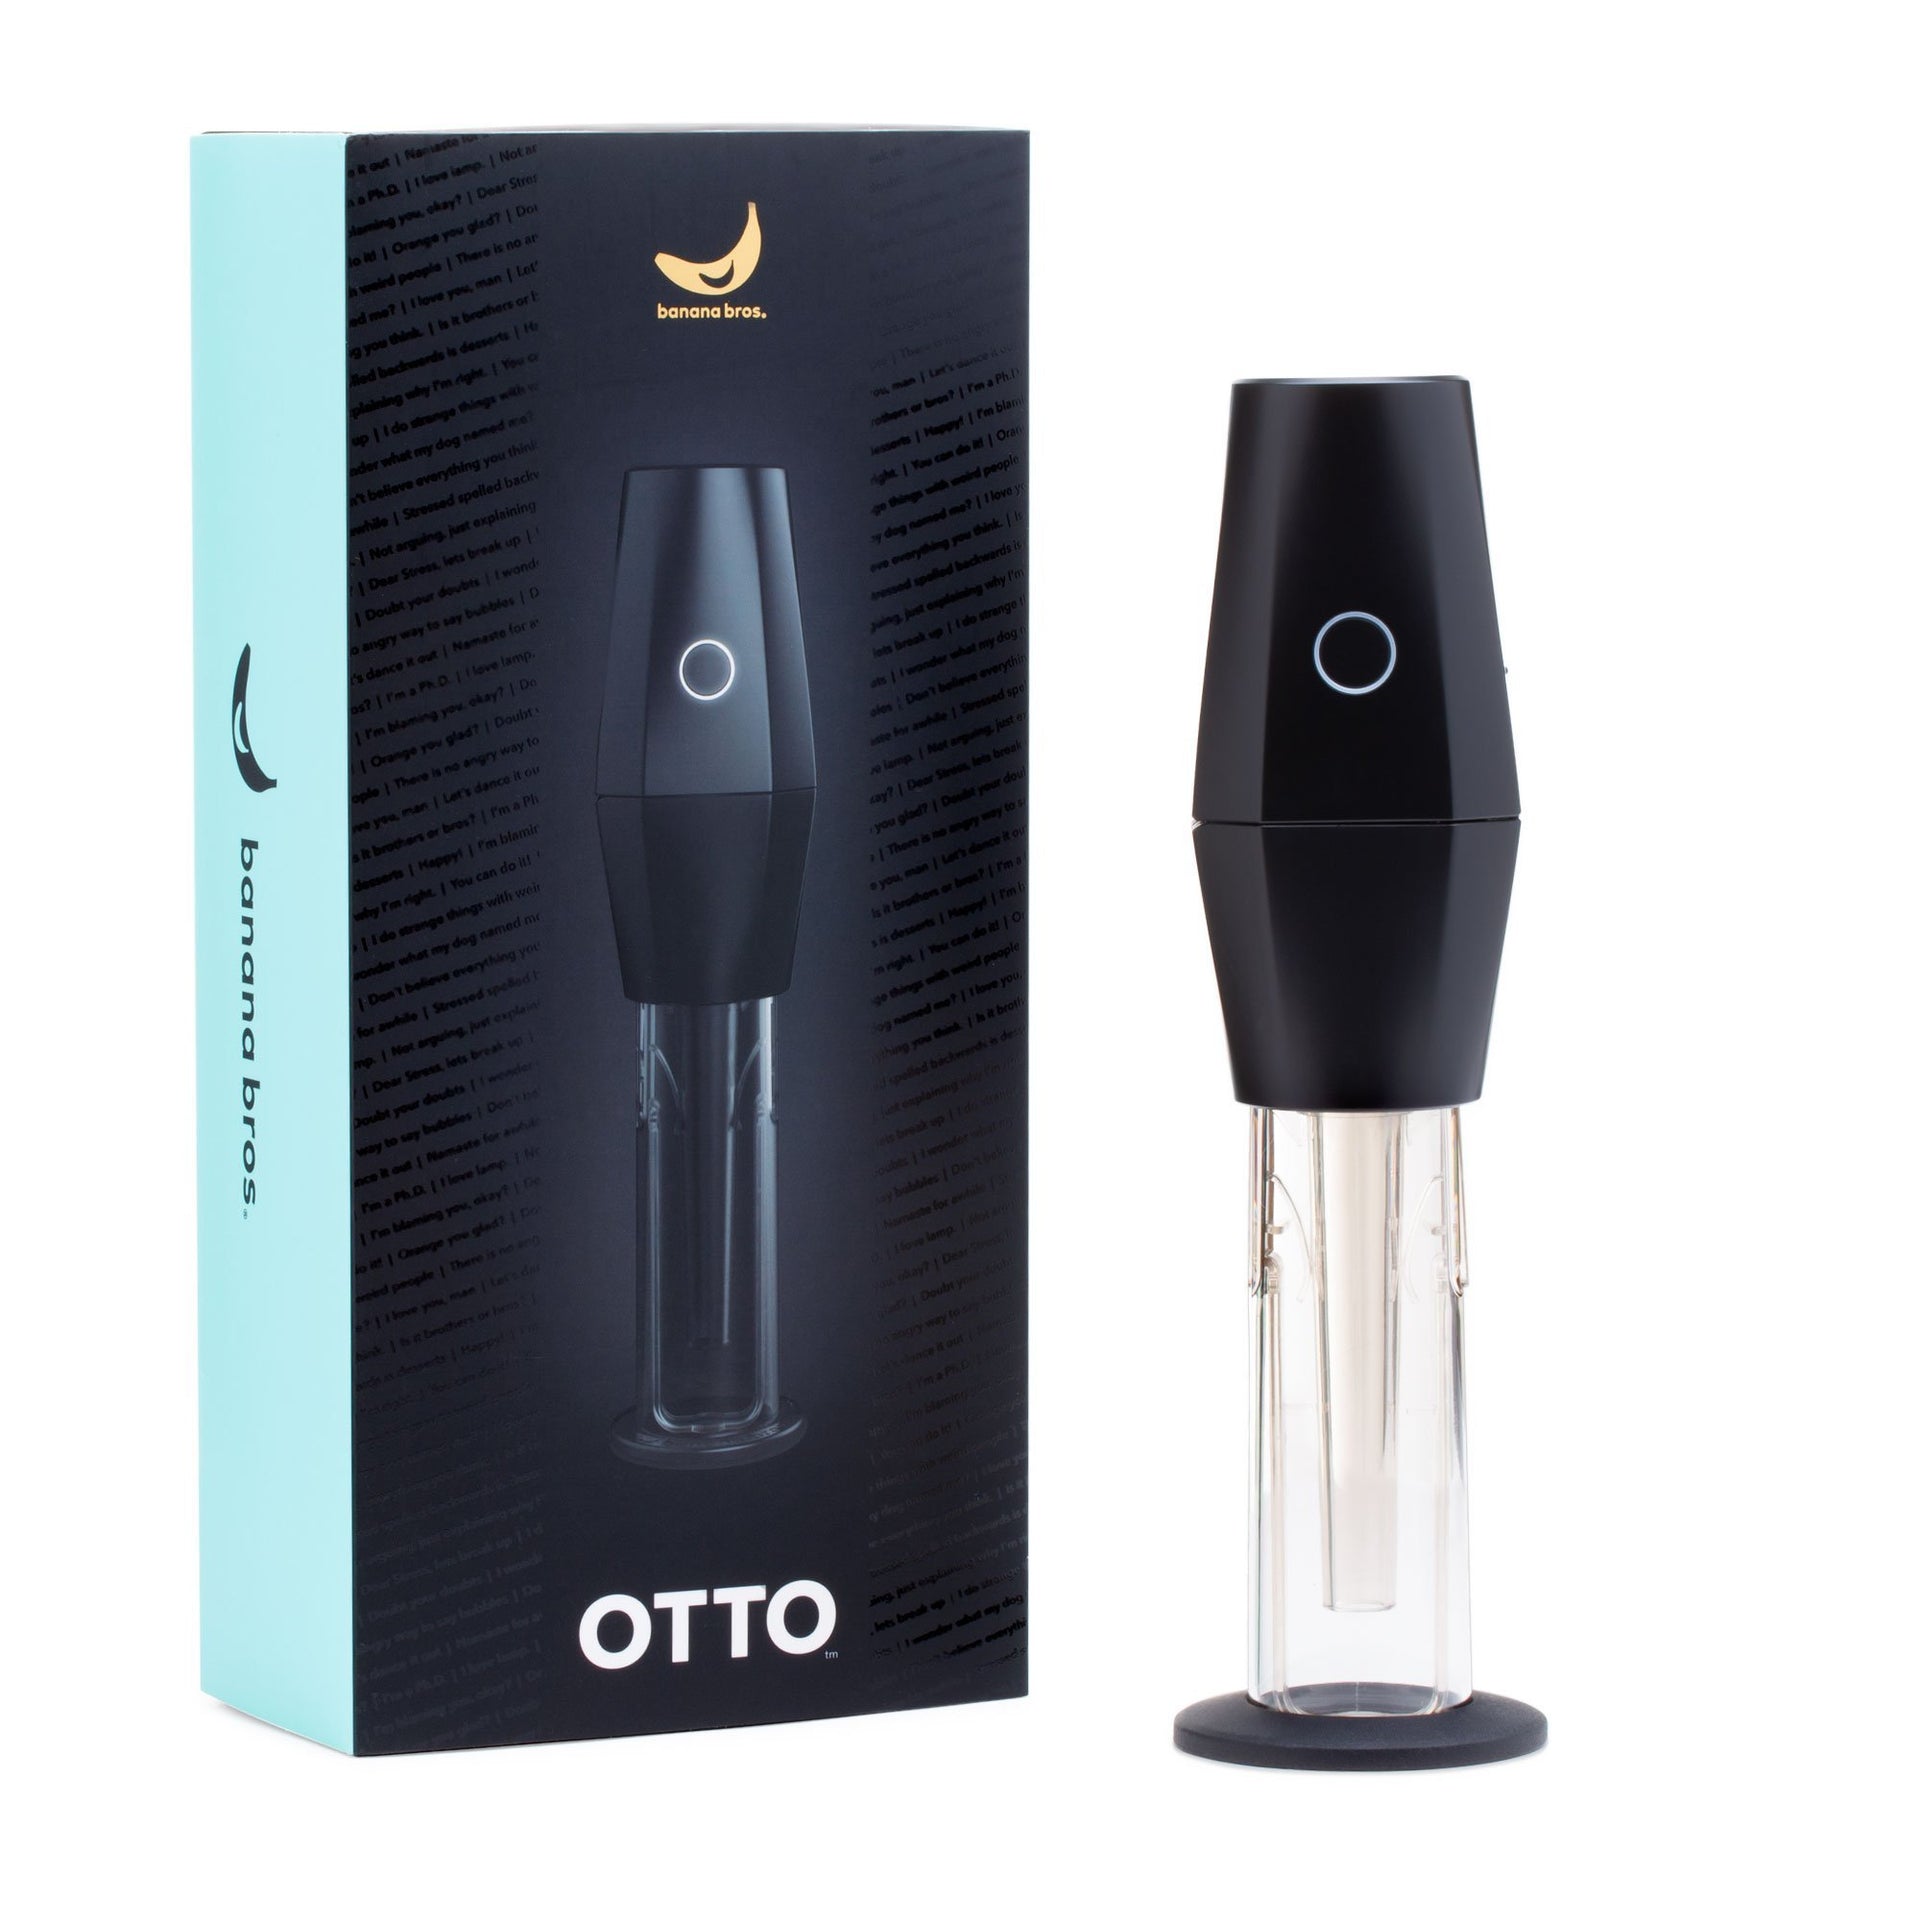 OTTO Grinder & Smart Rolling Machine by Banana Bros – The VapeLife